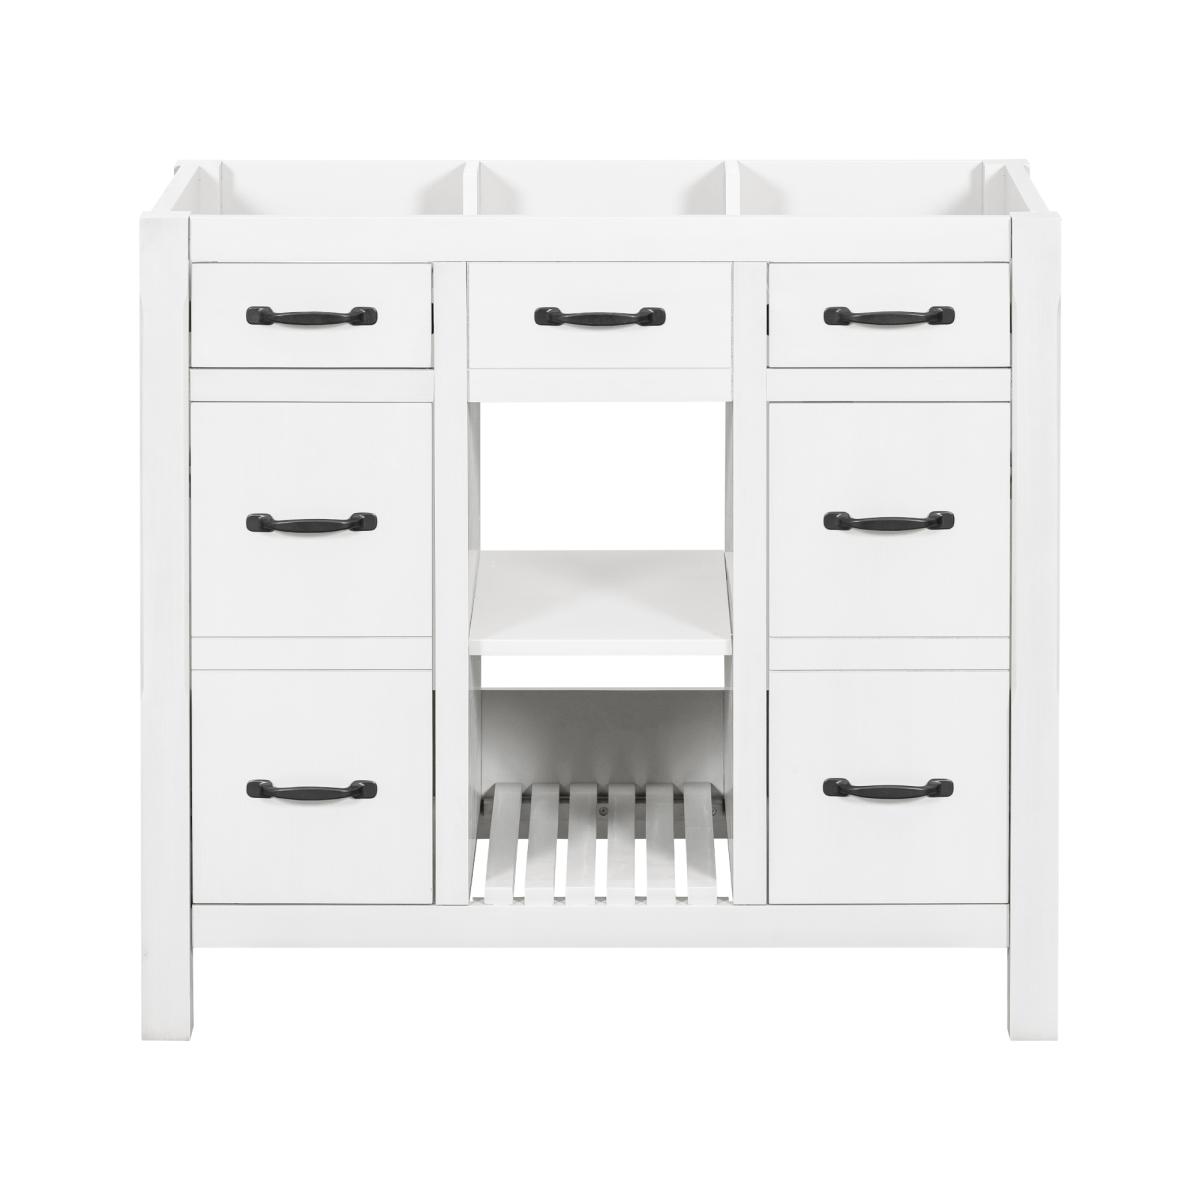 36''Bathroom Vanity without Sink,Modern Bathroom Storage Cabinet with 2 Drawers and 2 Cabinets,Solid Wood Frame Bathroom Cabinet (not Include Basin)